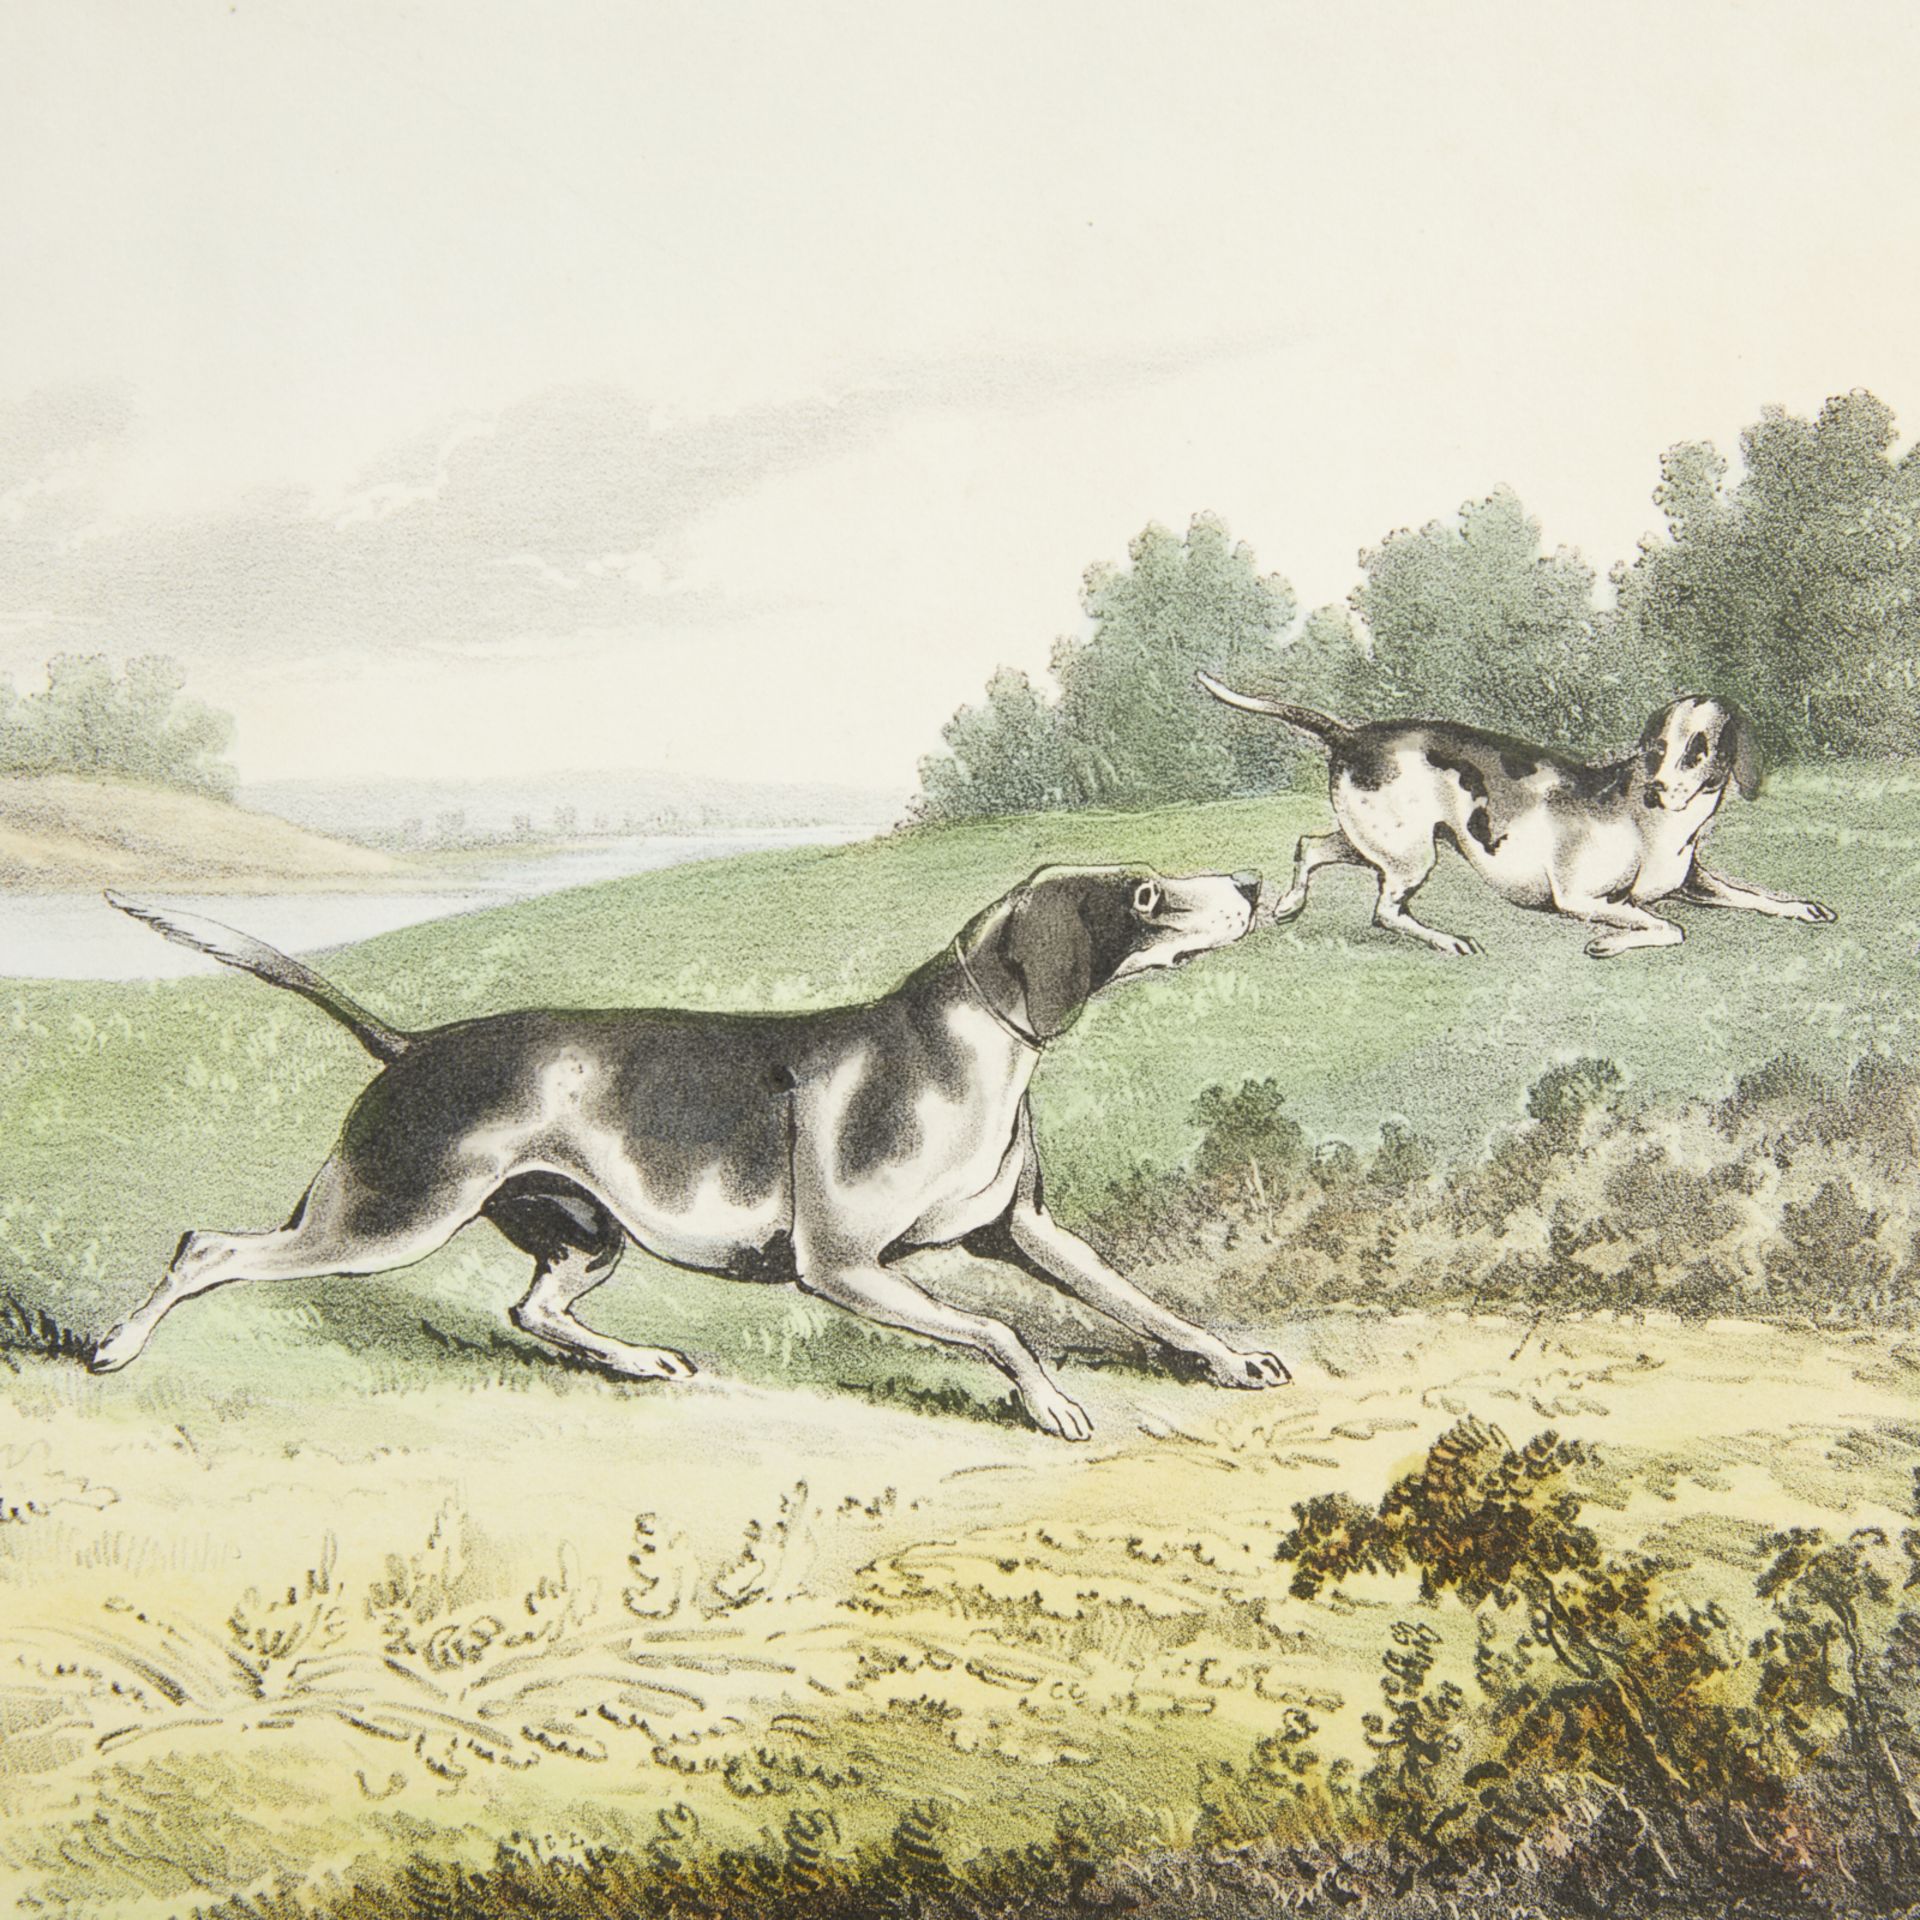 Currier & Ives "Pointers" Print 1846 - Image 7 of 8